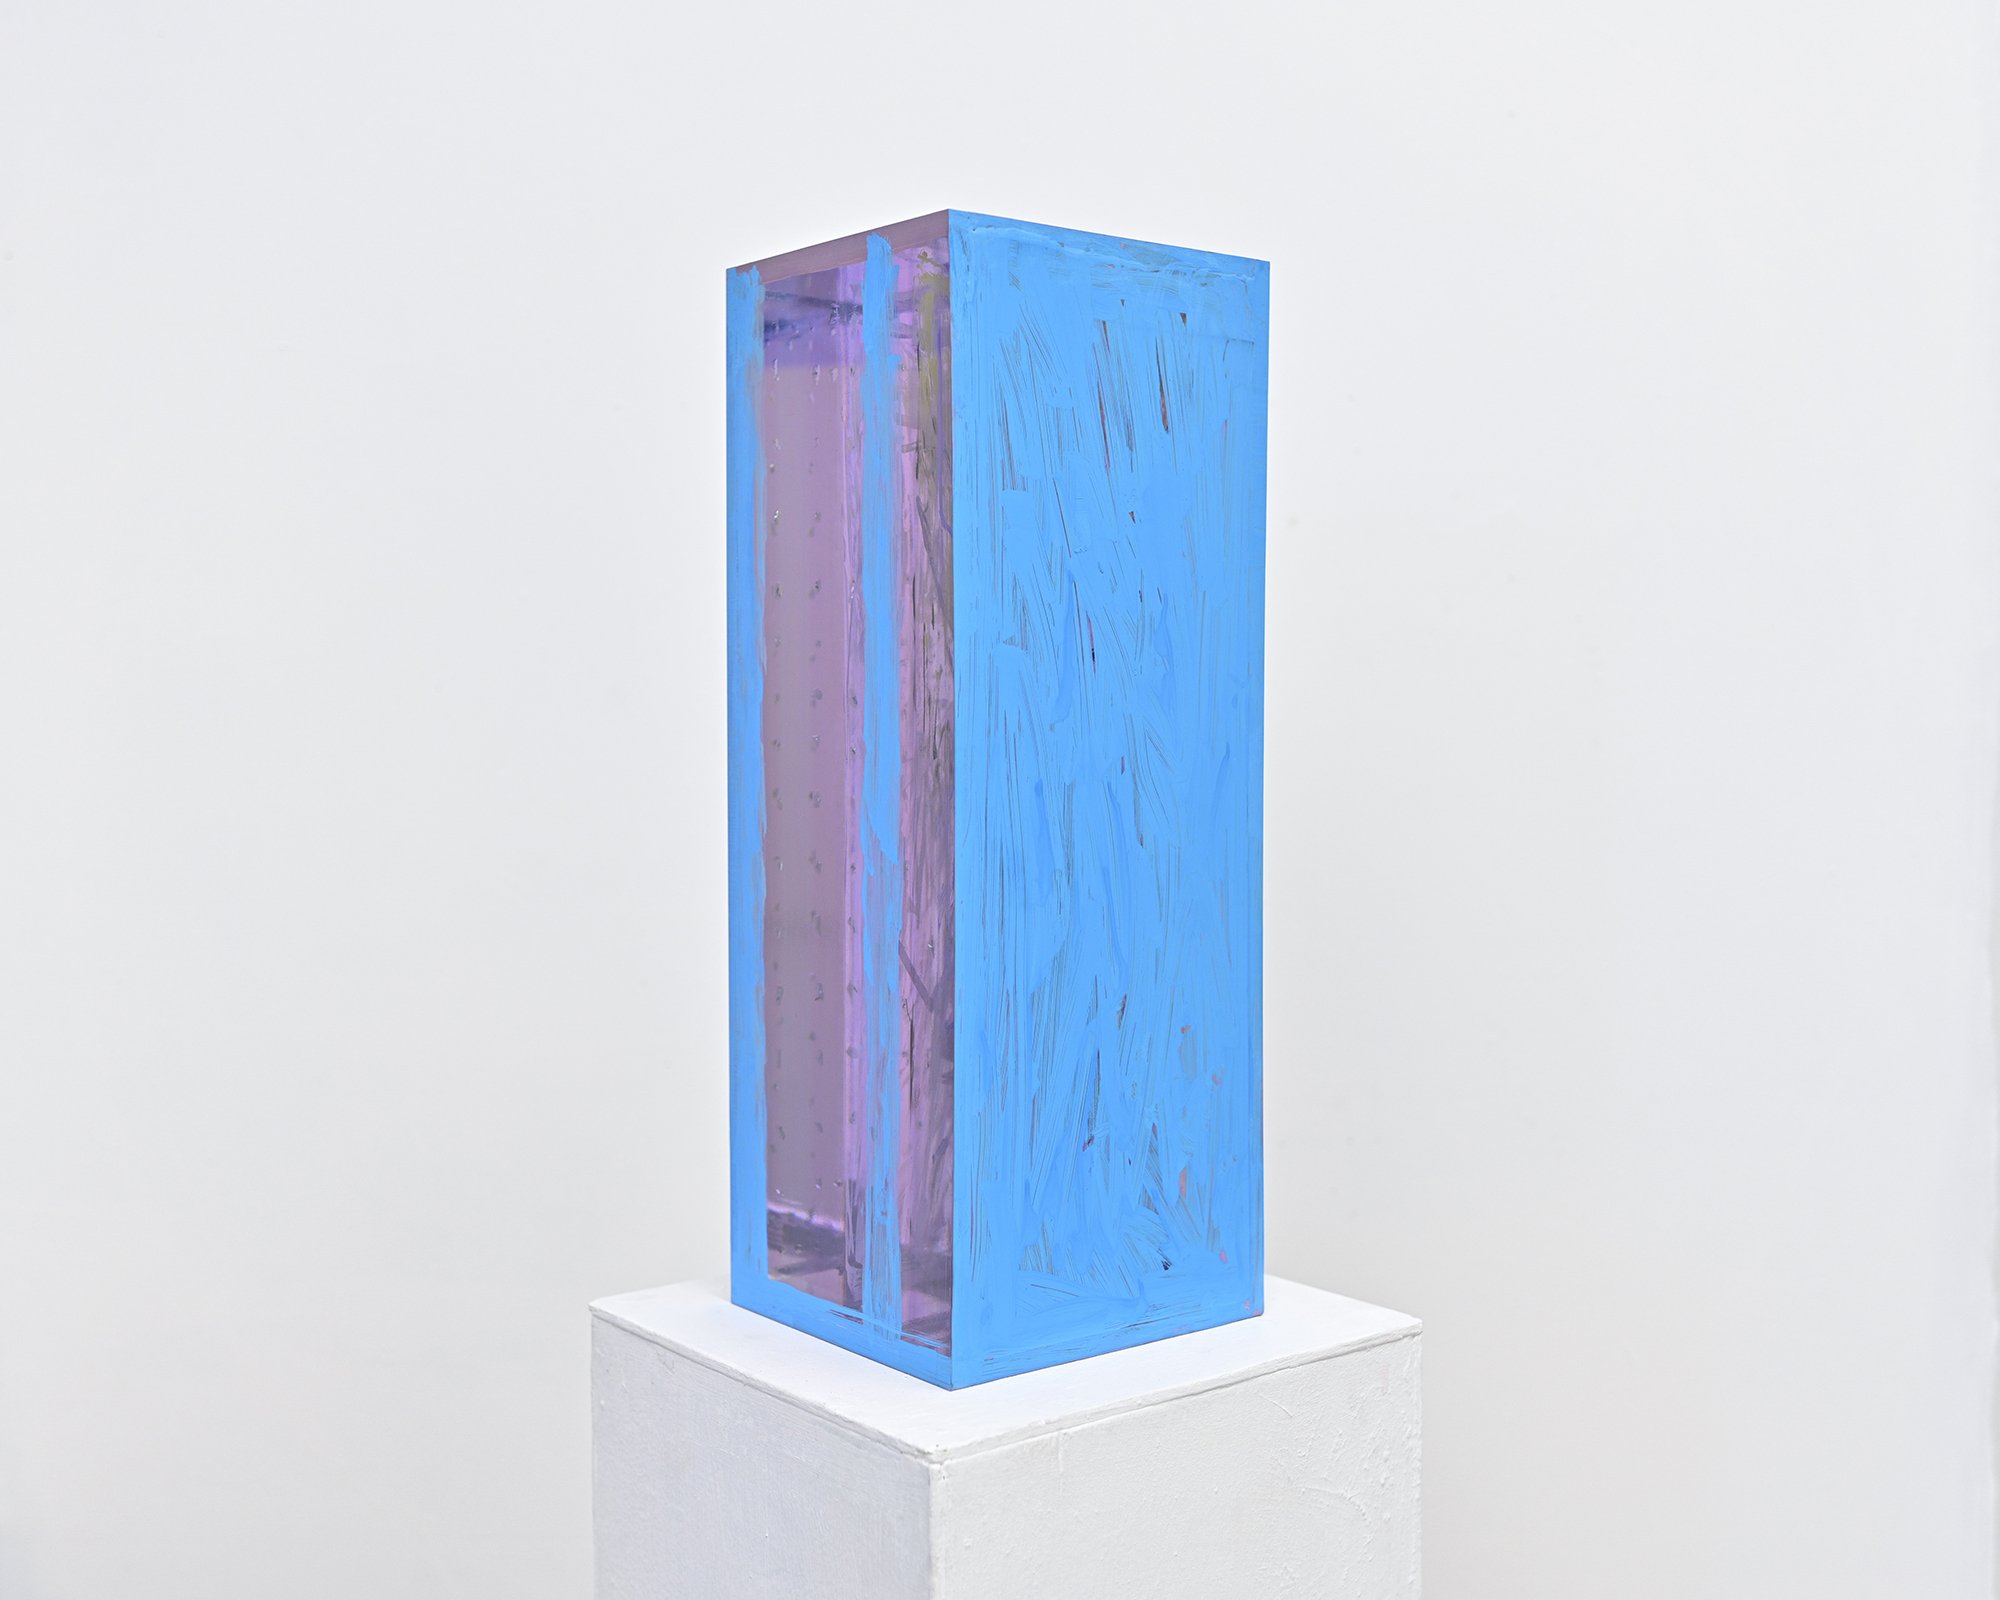  vision quest (blue), resin, paint, salvaged 1970s car glass in acrylic, 17 1/2” x 7” x 7” 